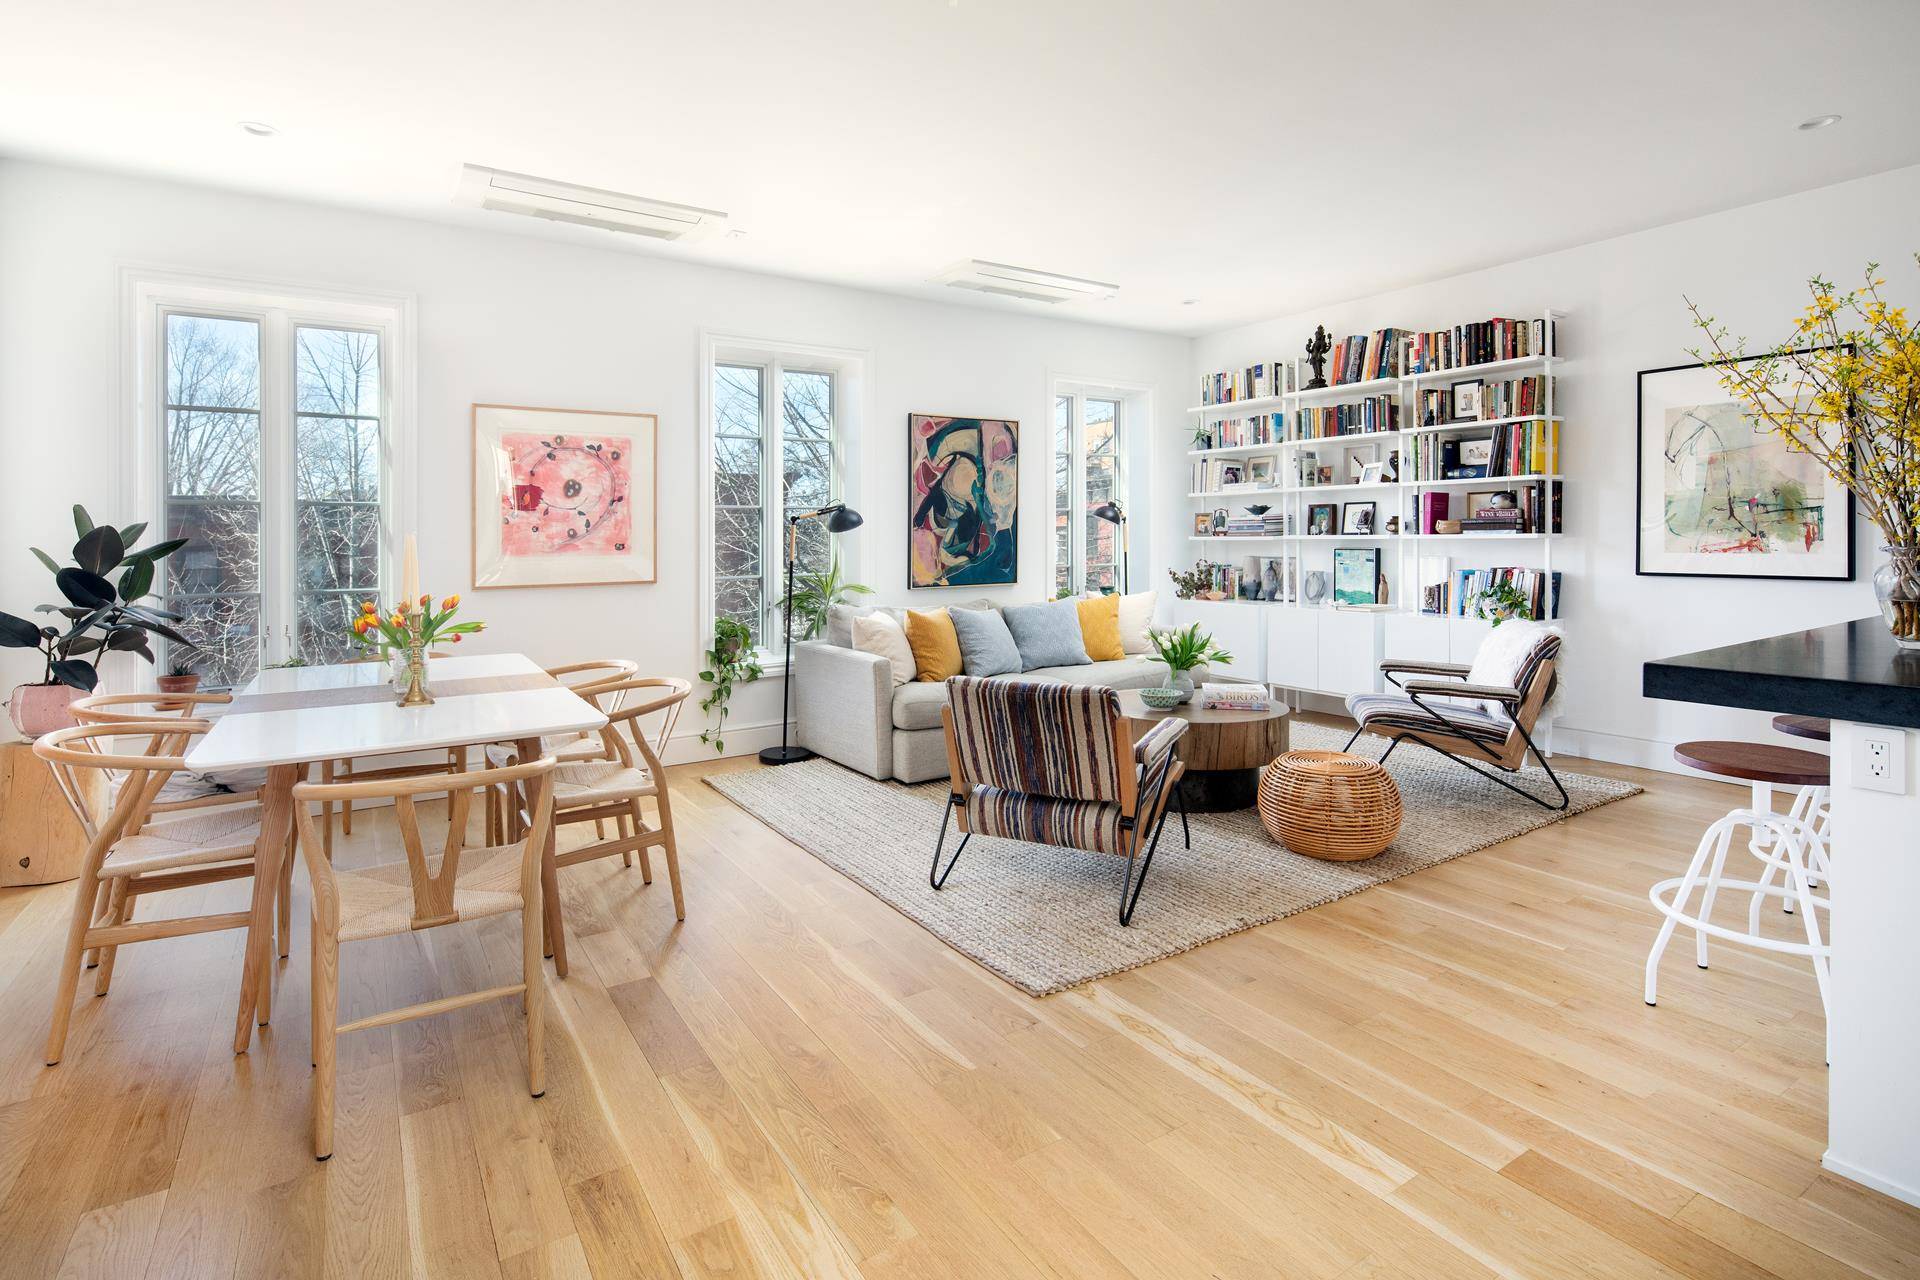 Featuring elite craftsmanship and two private outdoor spaces, this four bedroom, three and a half bathroom duplex penthouse condominium is the perfect Park Slope sanctuary.